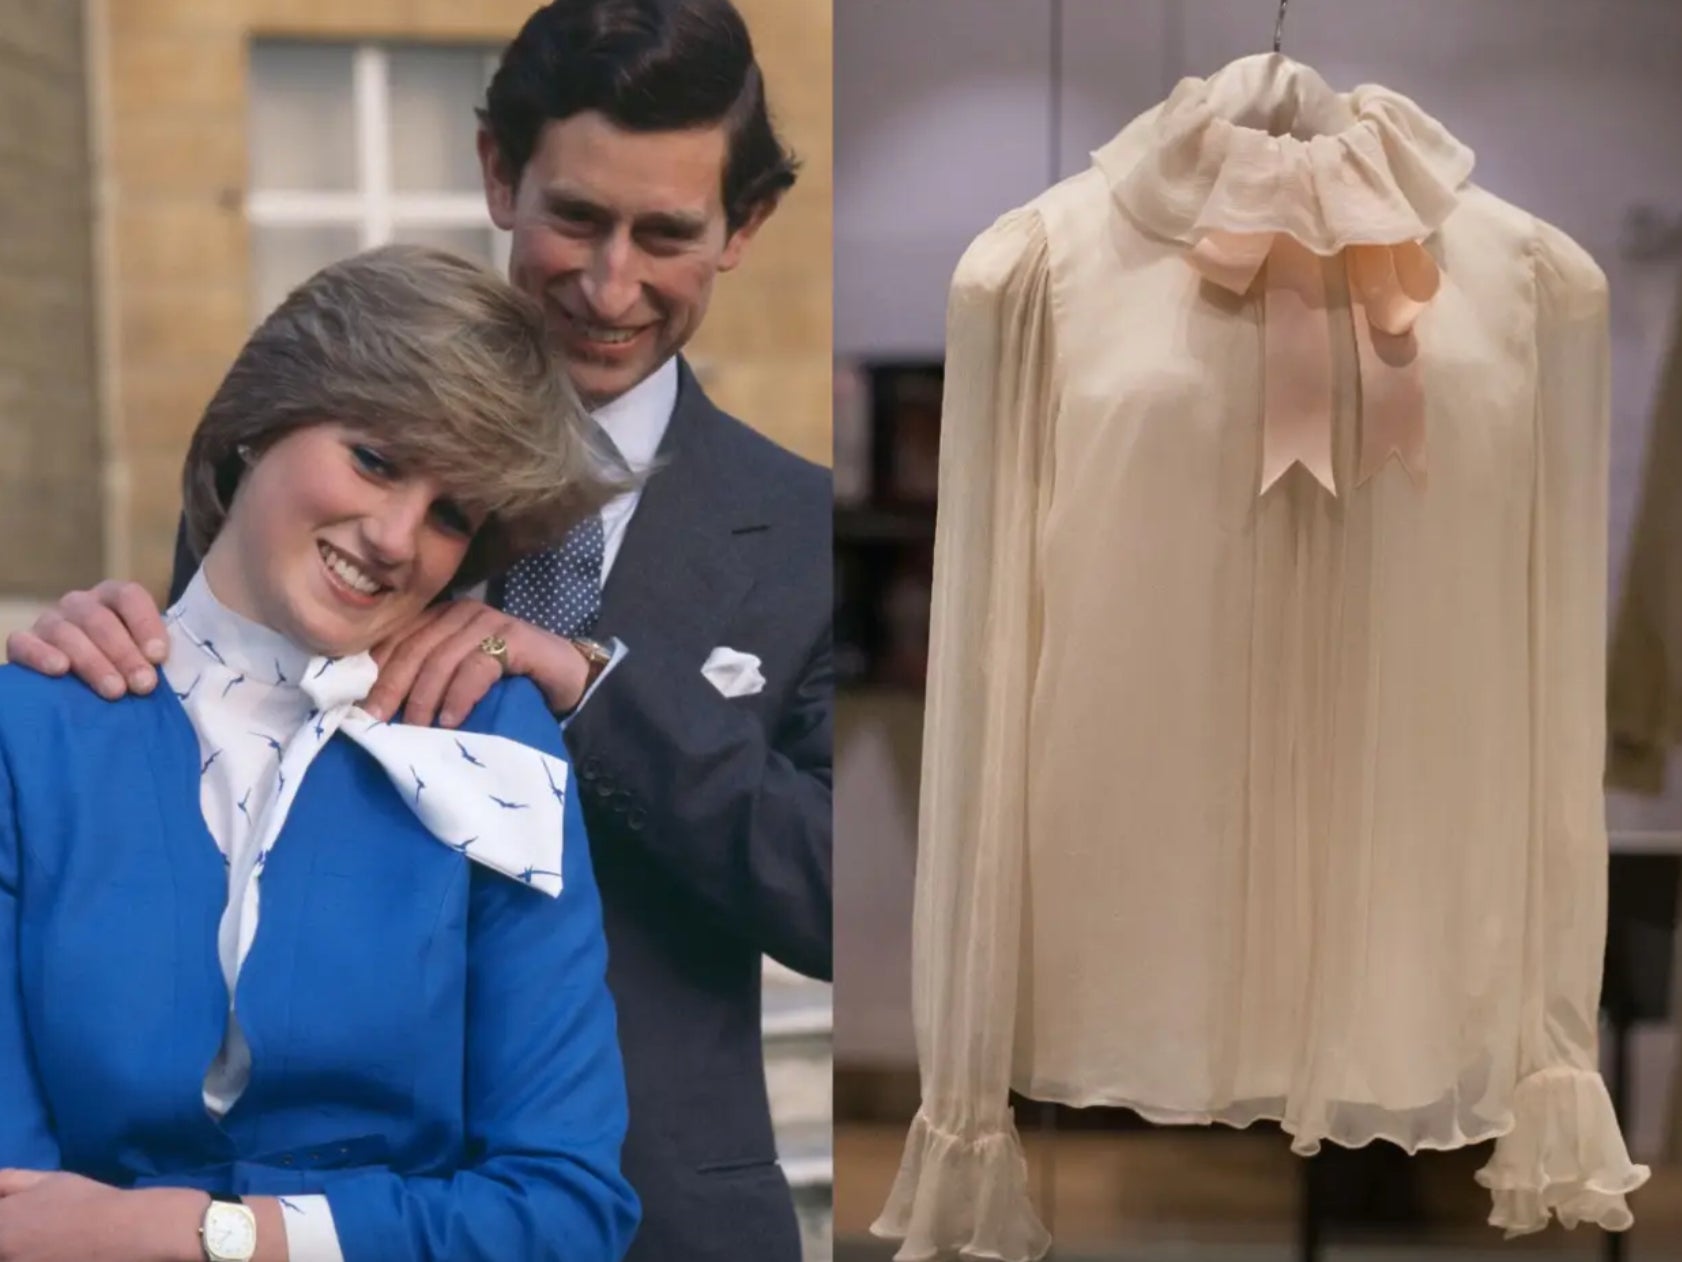 princess diana, auction house, princess of wales, engagement, princess diana engagement blouse expected to sell for 100k at auction